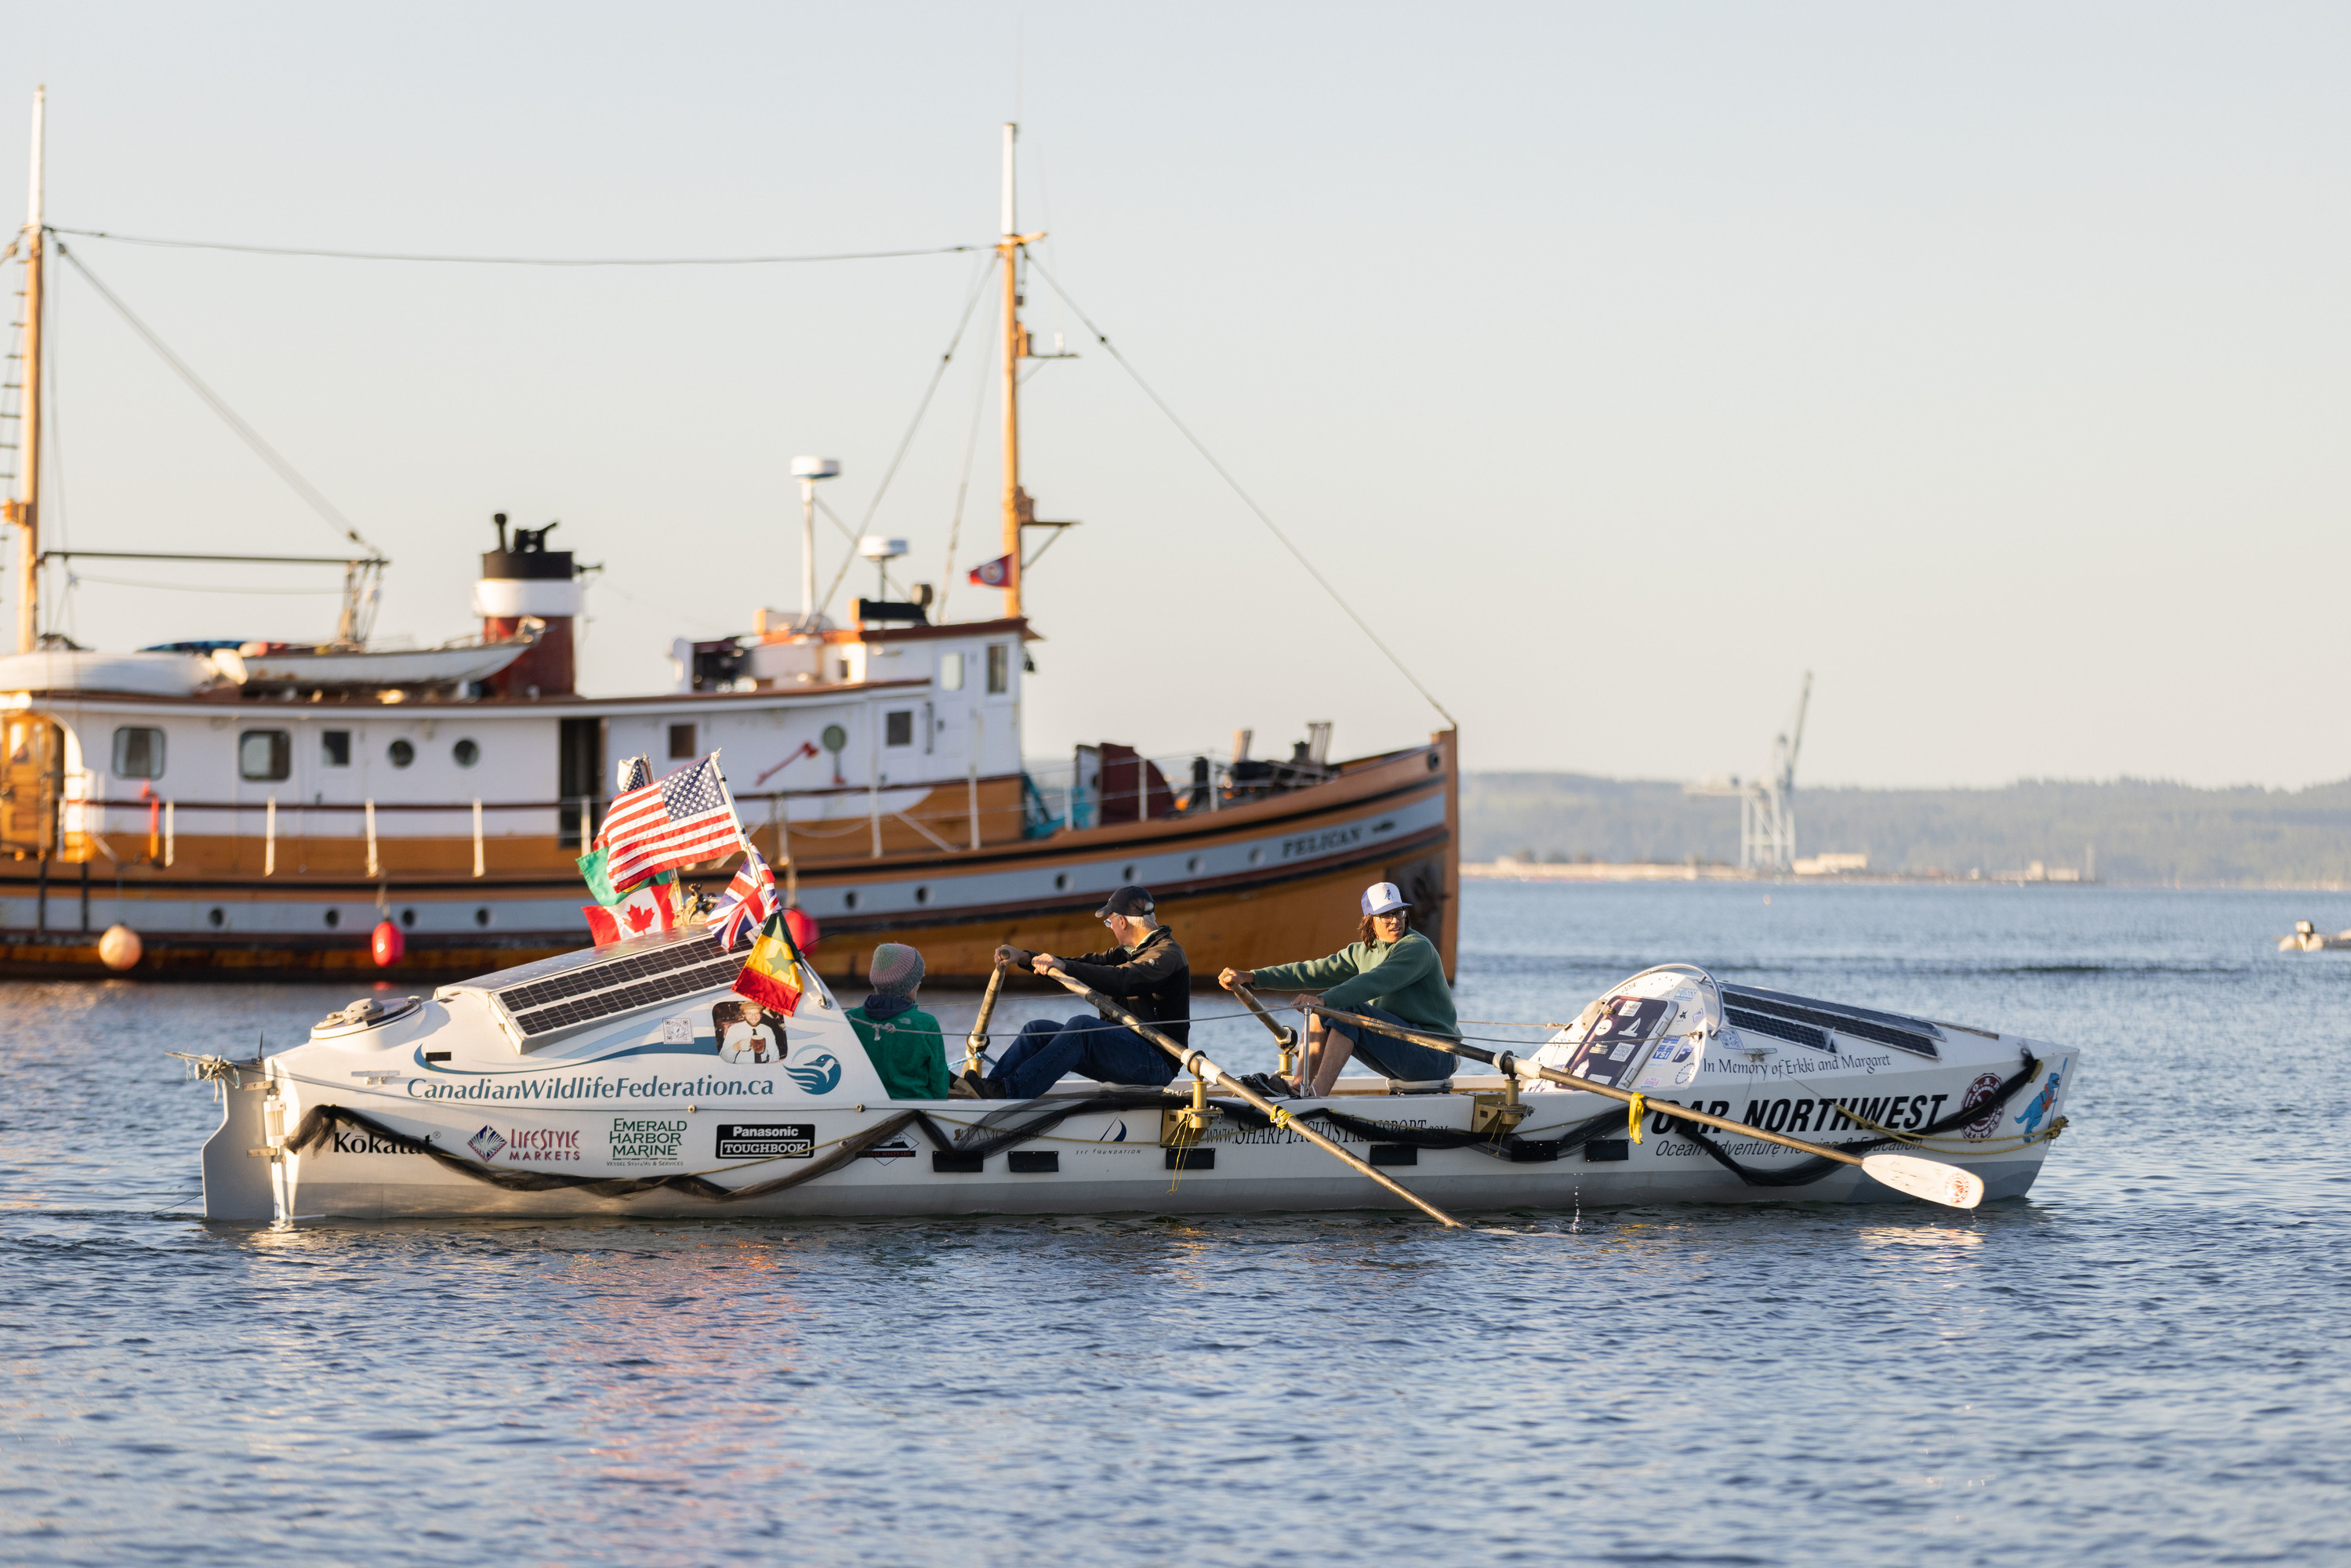 The James Robert Hanssen, an ocean-going fiberglass row boat, is rowed across Port Townsend Bay to be decommissioned and recycled in 2013.